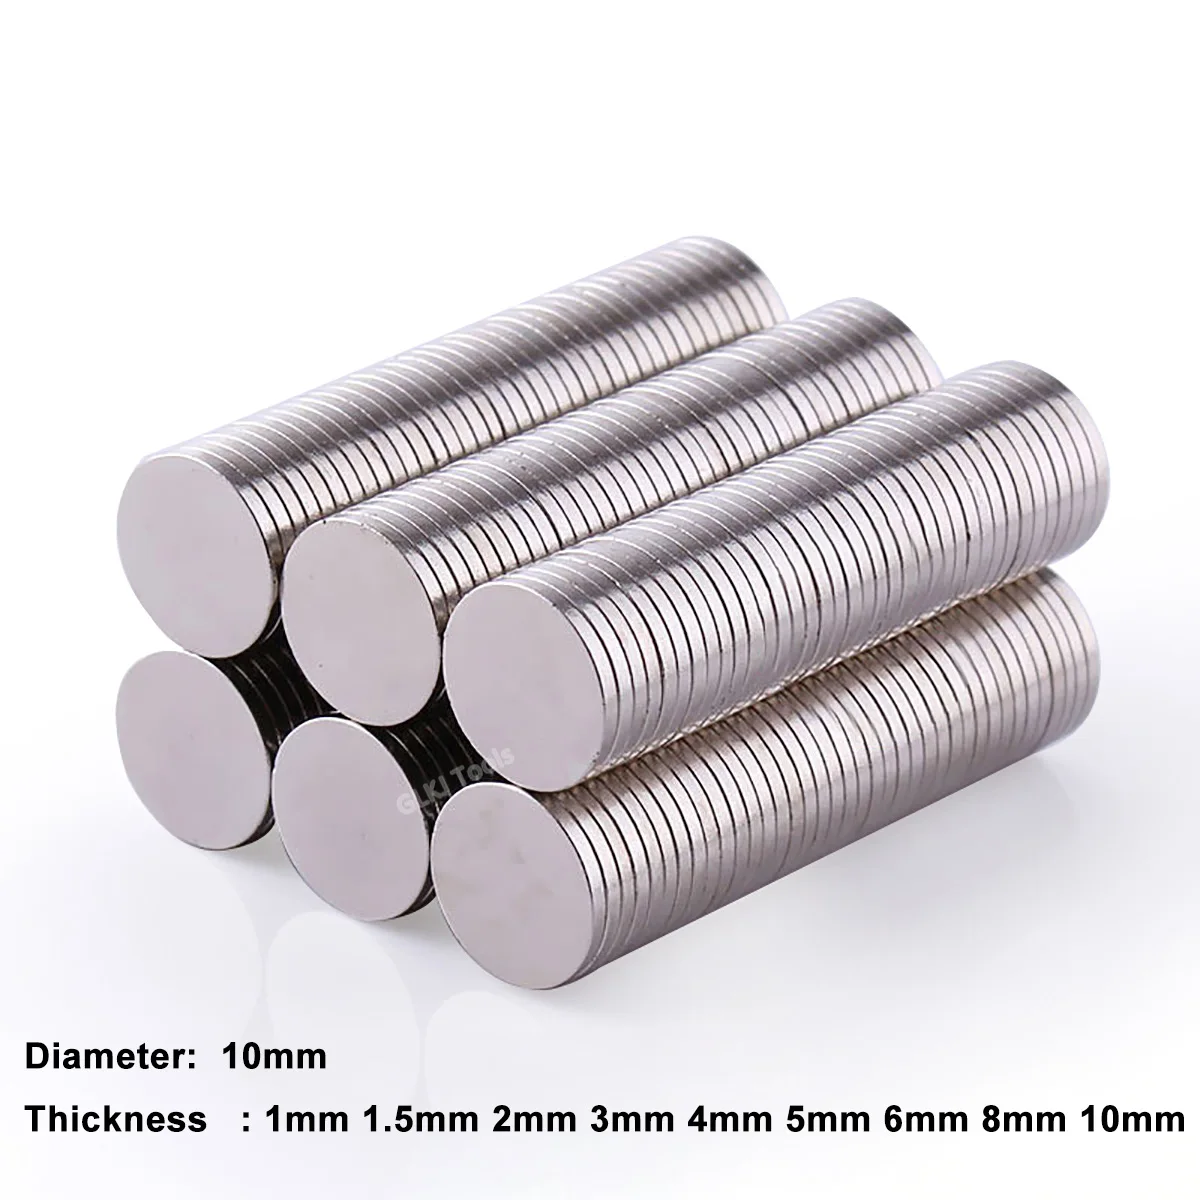 Tiny Neodymium Disc Magnets 2mm 3mm 4mm 5mm 6mm N50 Small Strong Craft 